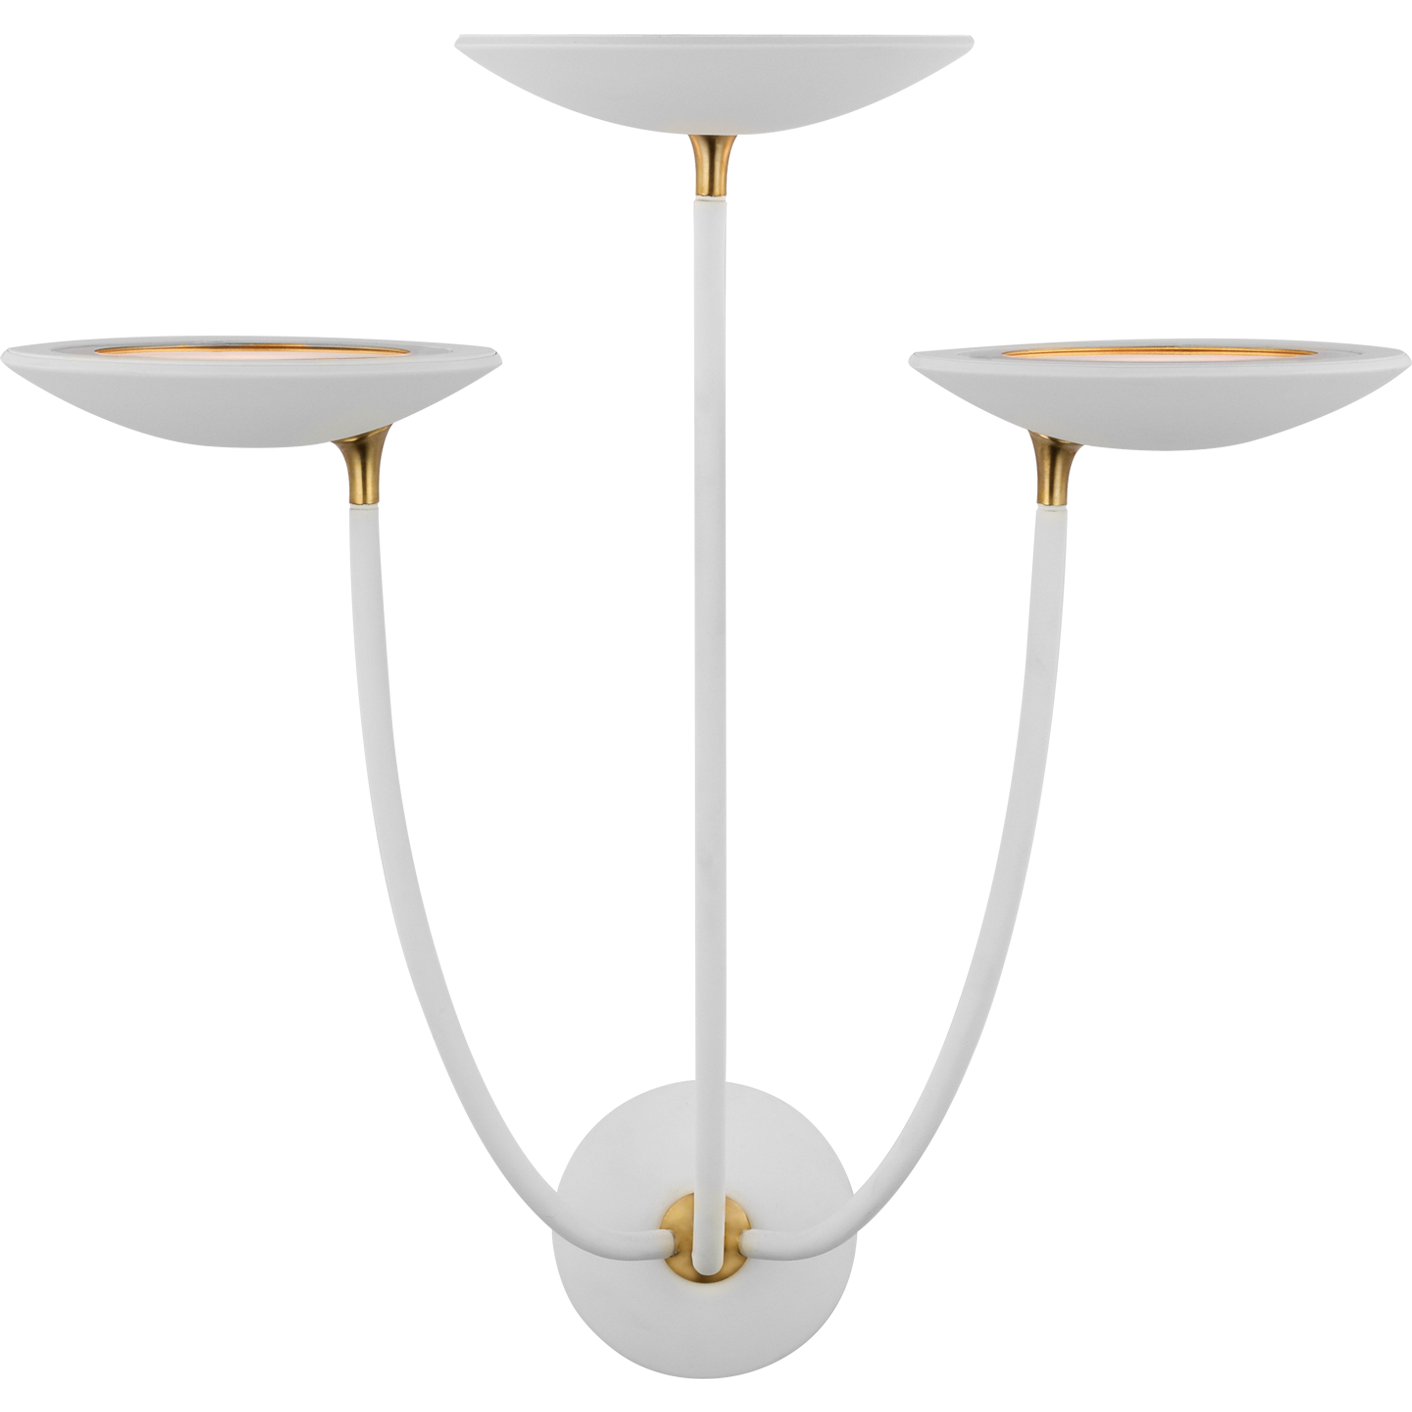 Keira Large Triple Sconce